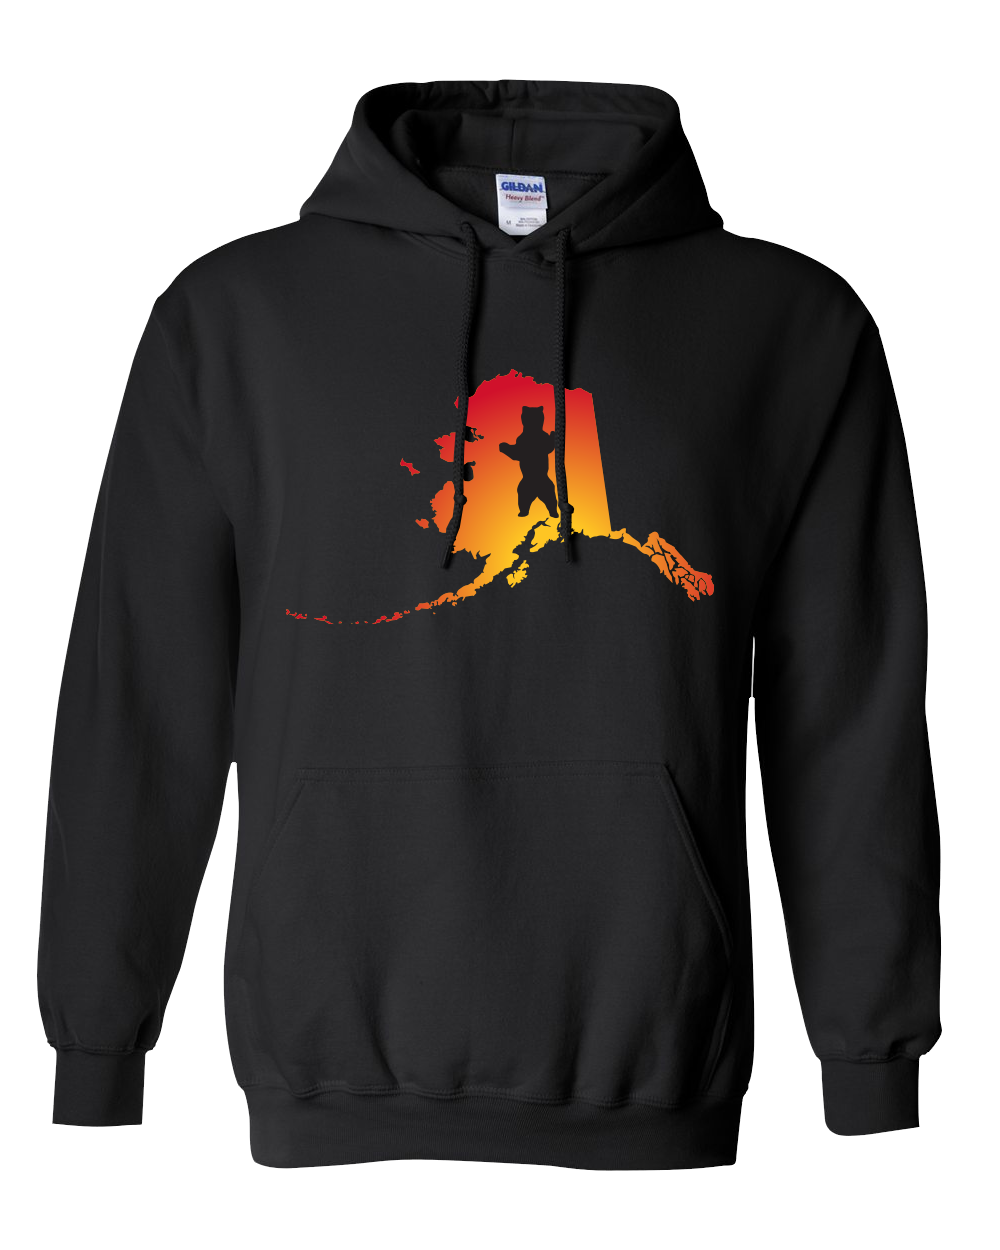 Pullover Hooded Sweatshirt Alaska Black Brown Bear Vibrant Design High Quality Tight Knit Ring Spun Low Maintenance Cotton Printed With The Newest Available Color Transfer Technology